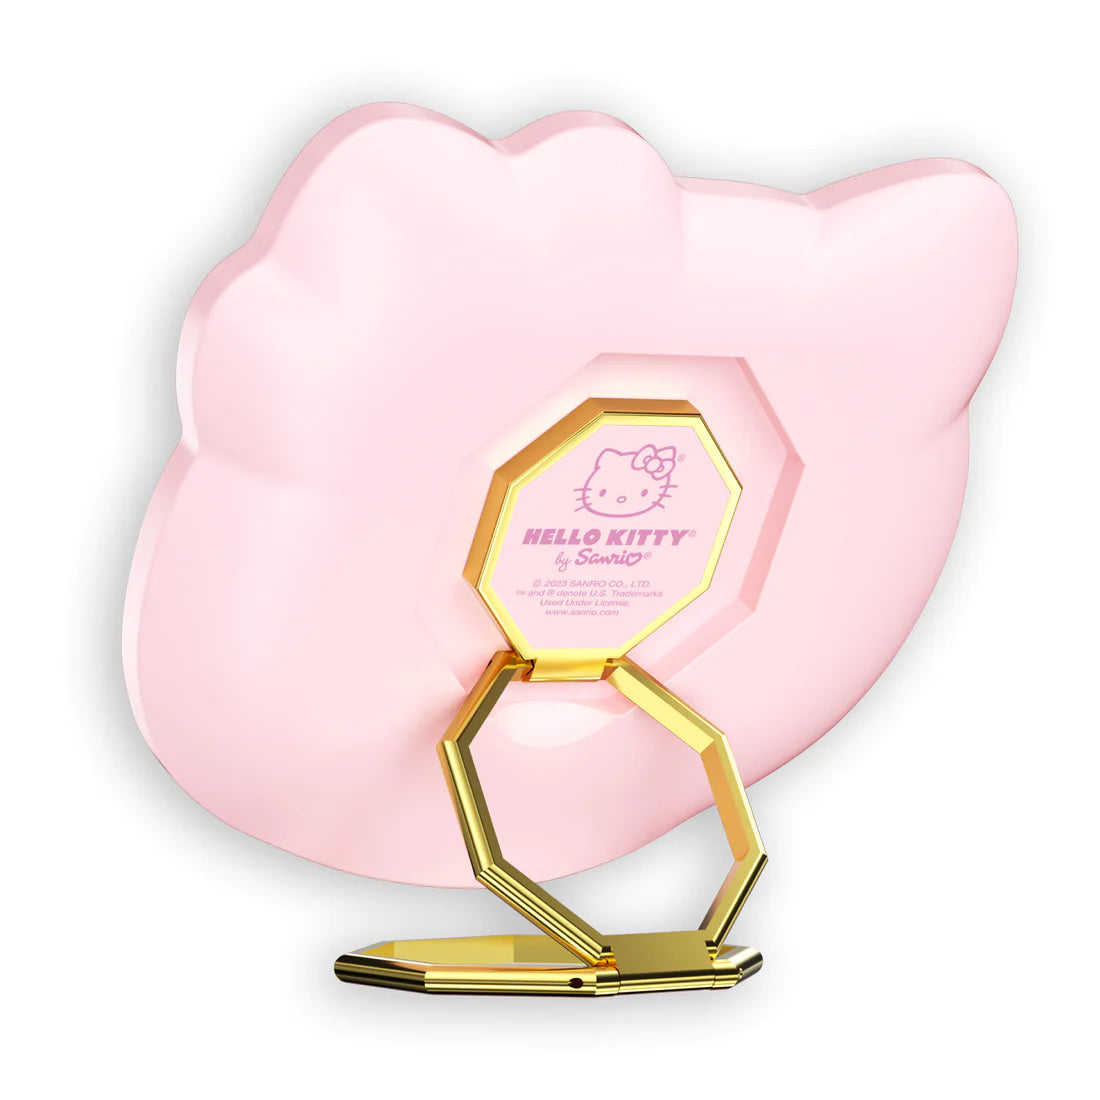 Impressions Vanity - Hello Kitty Pocket Mirror with Ring Stand Pink